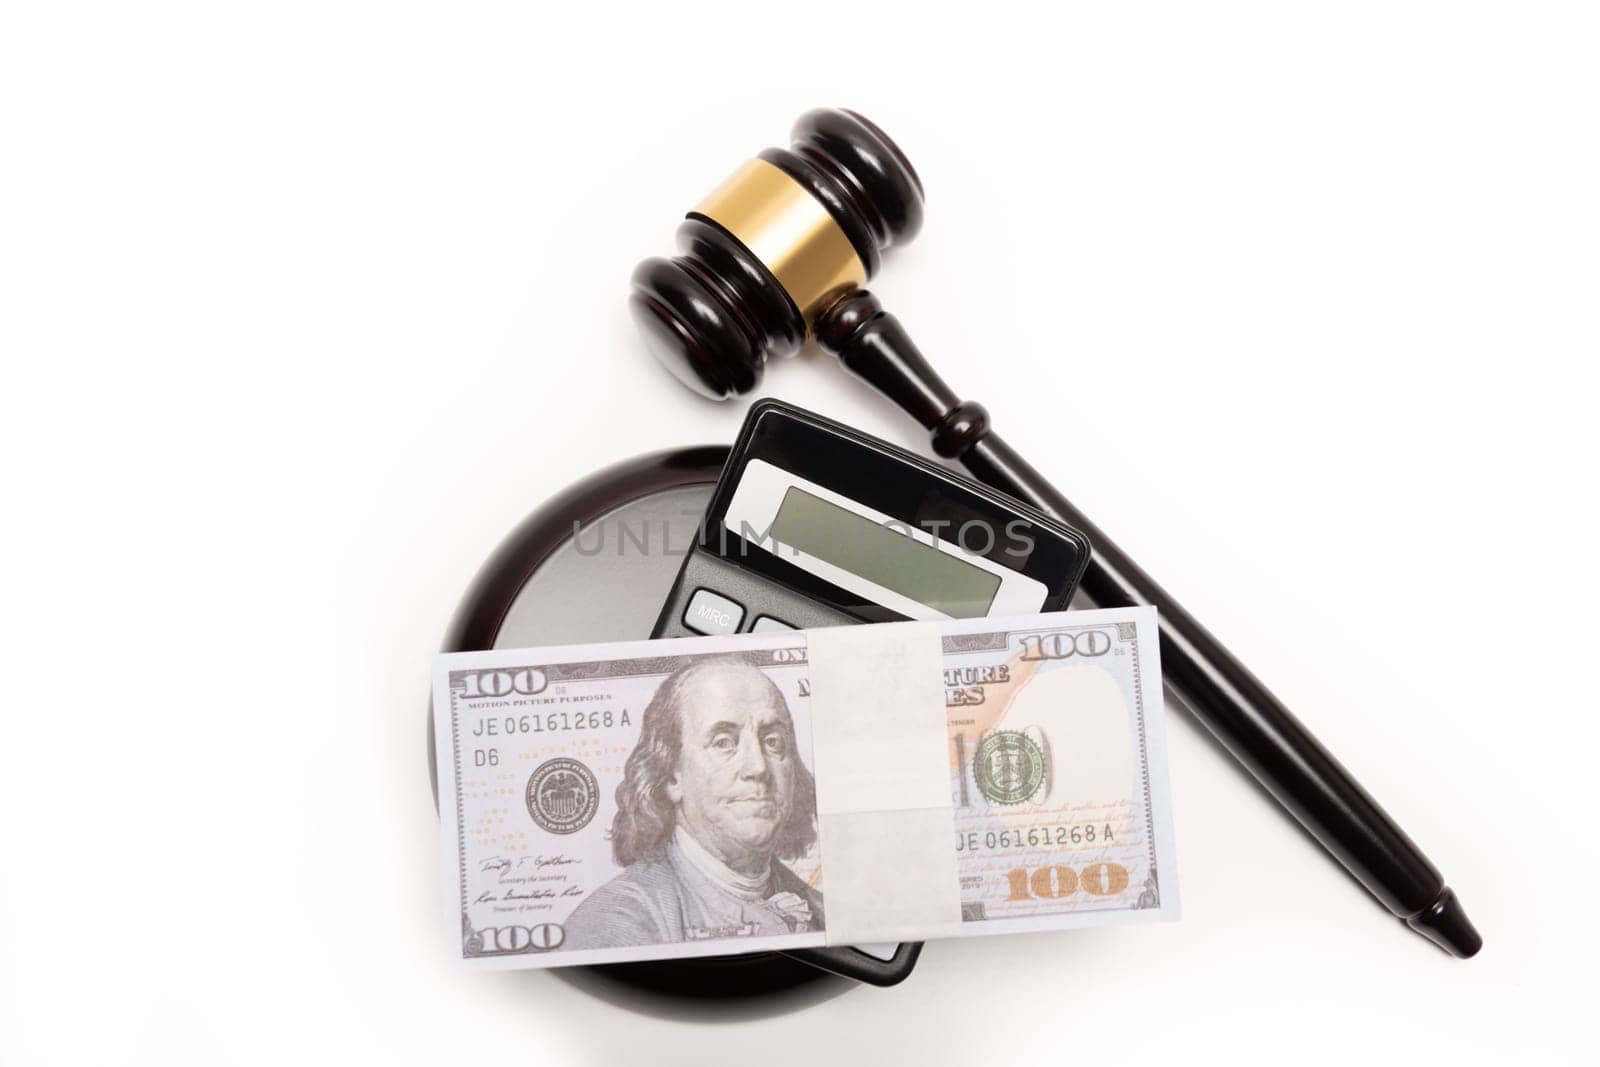 An isolated image of a judge's gavel on a stack of cash with a calculator, signifying legal fines or bail. by jbruiz78